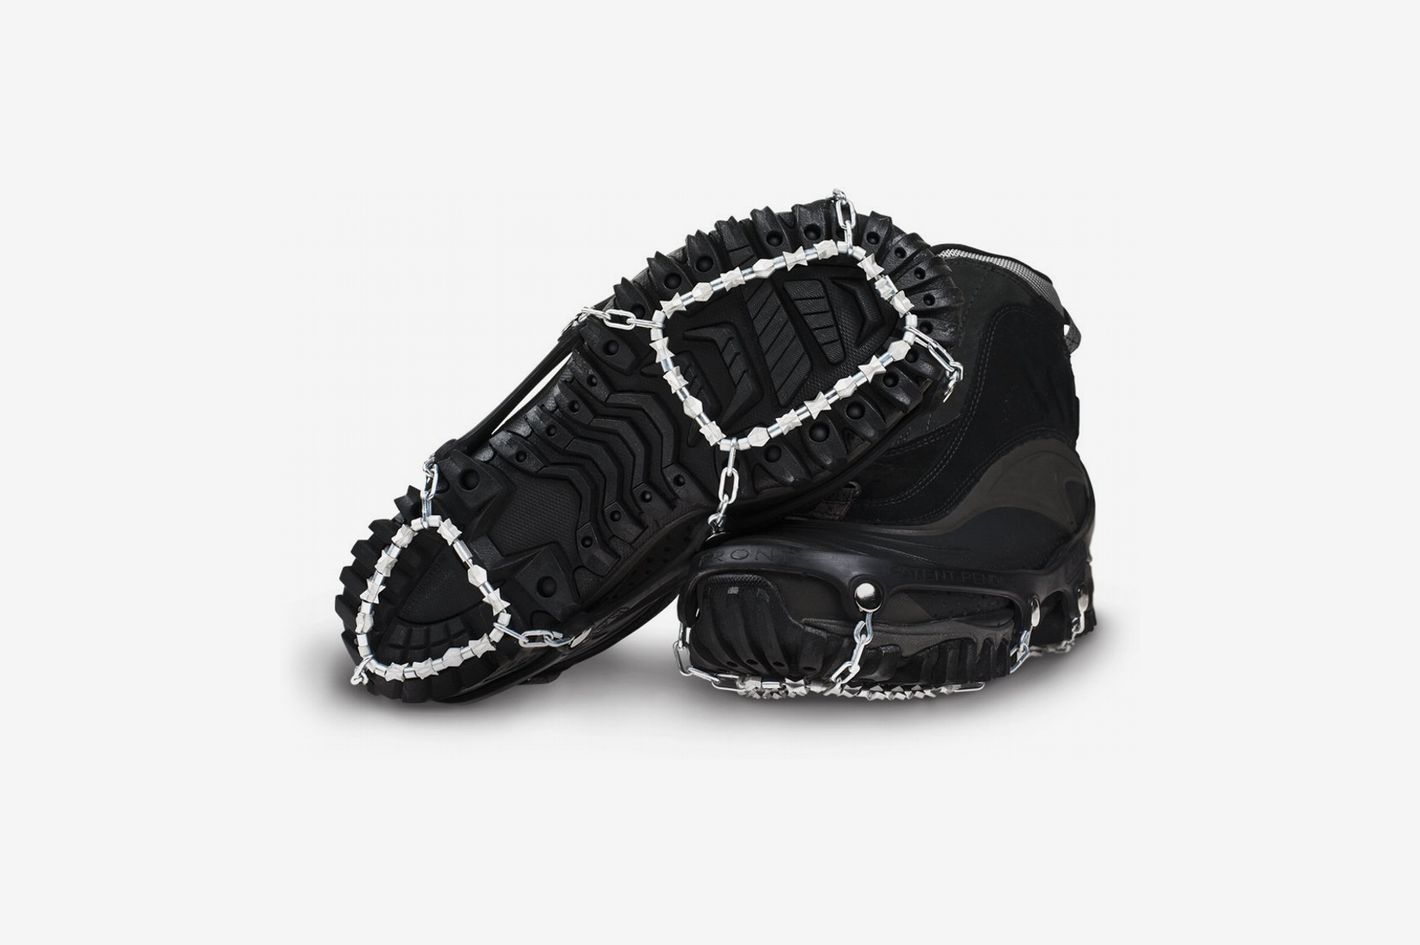 Traction Cleats for Walking on Snow and Ice Rubber Friction Boots Shoes Grips, 